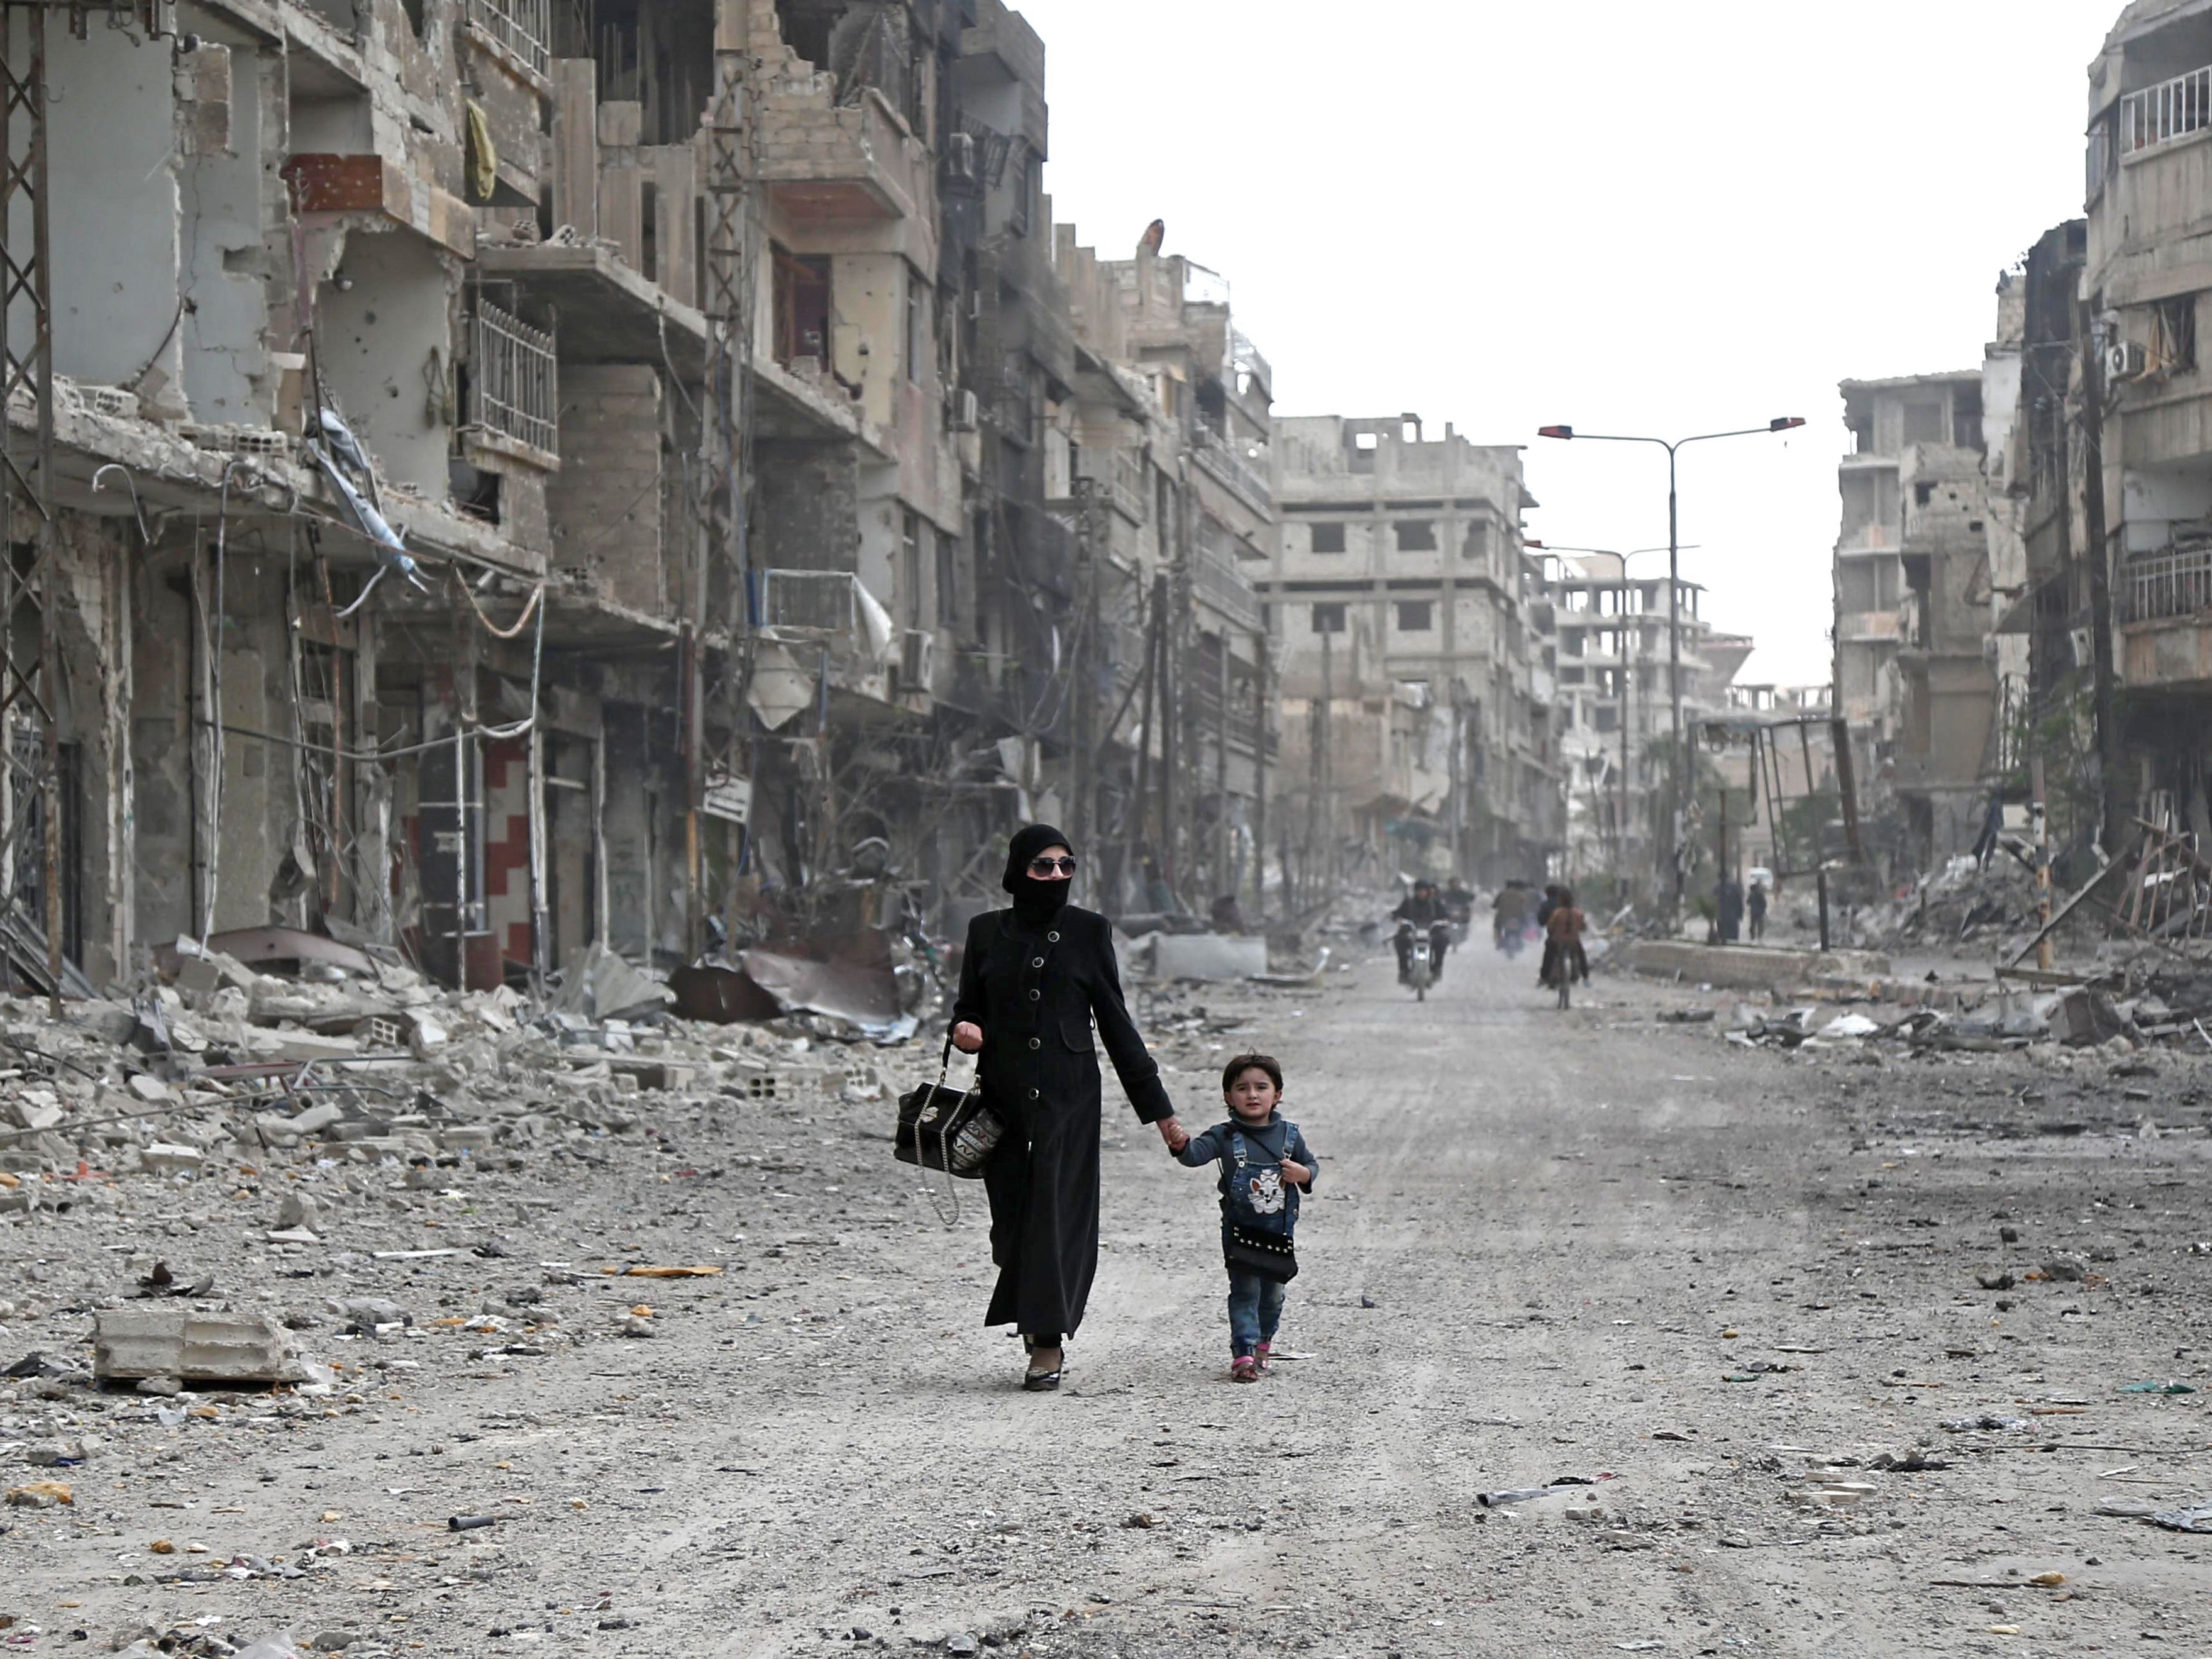 Syria’s civil war has raged for 10 years and resulted in the deaths of hundreds of thousands of people